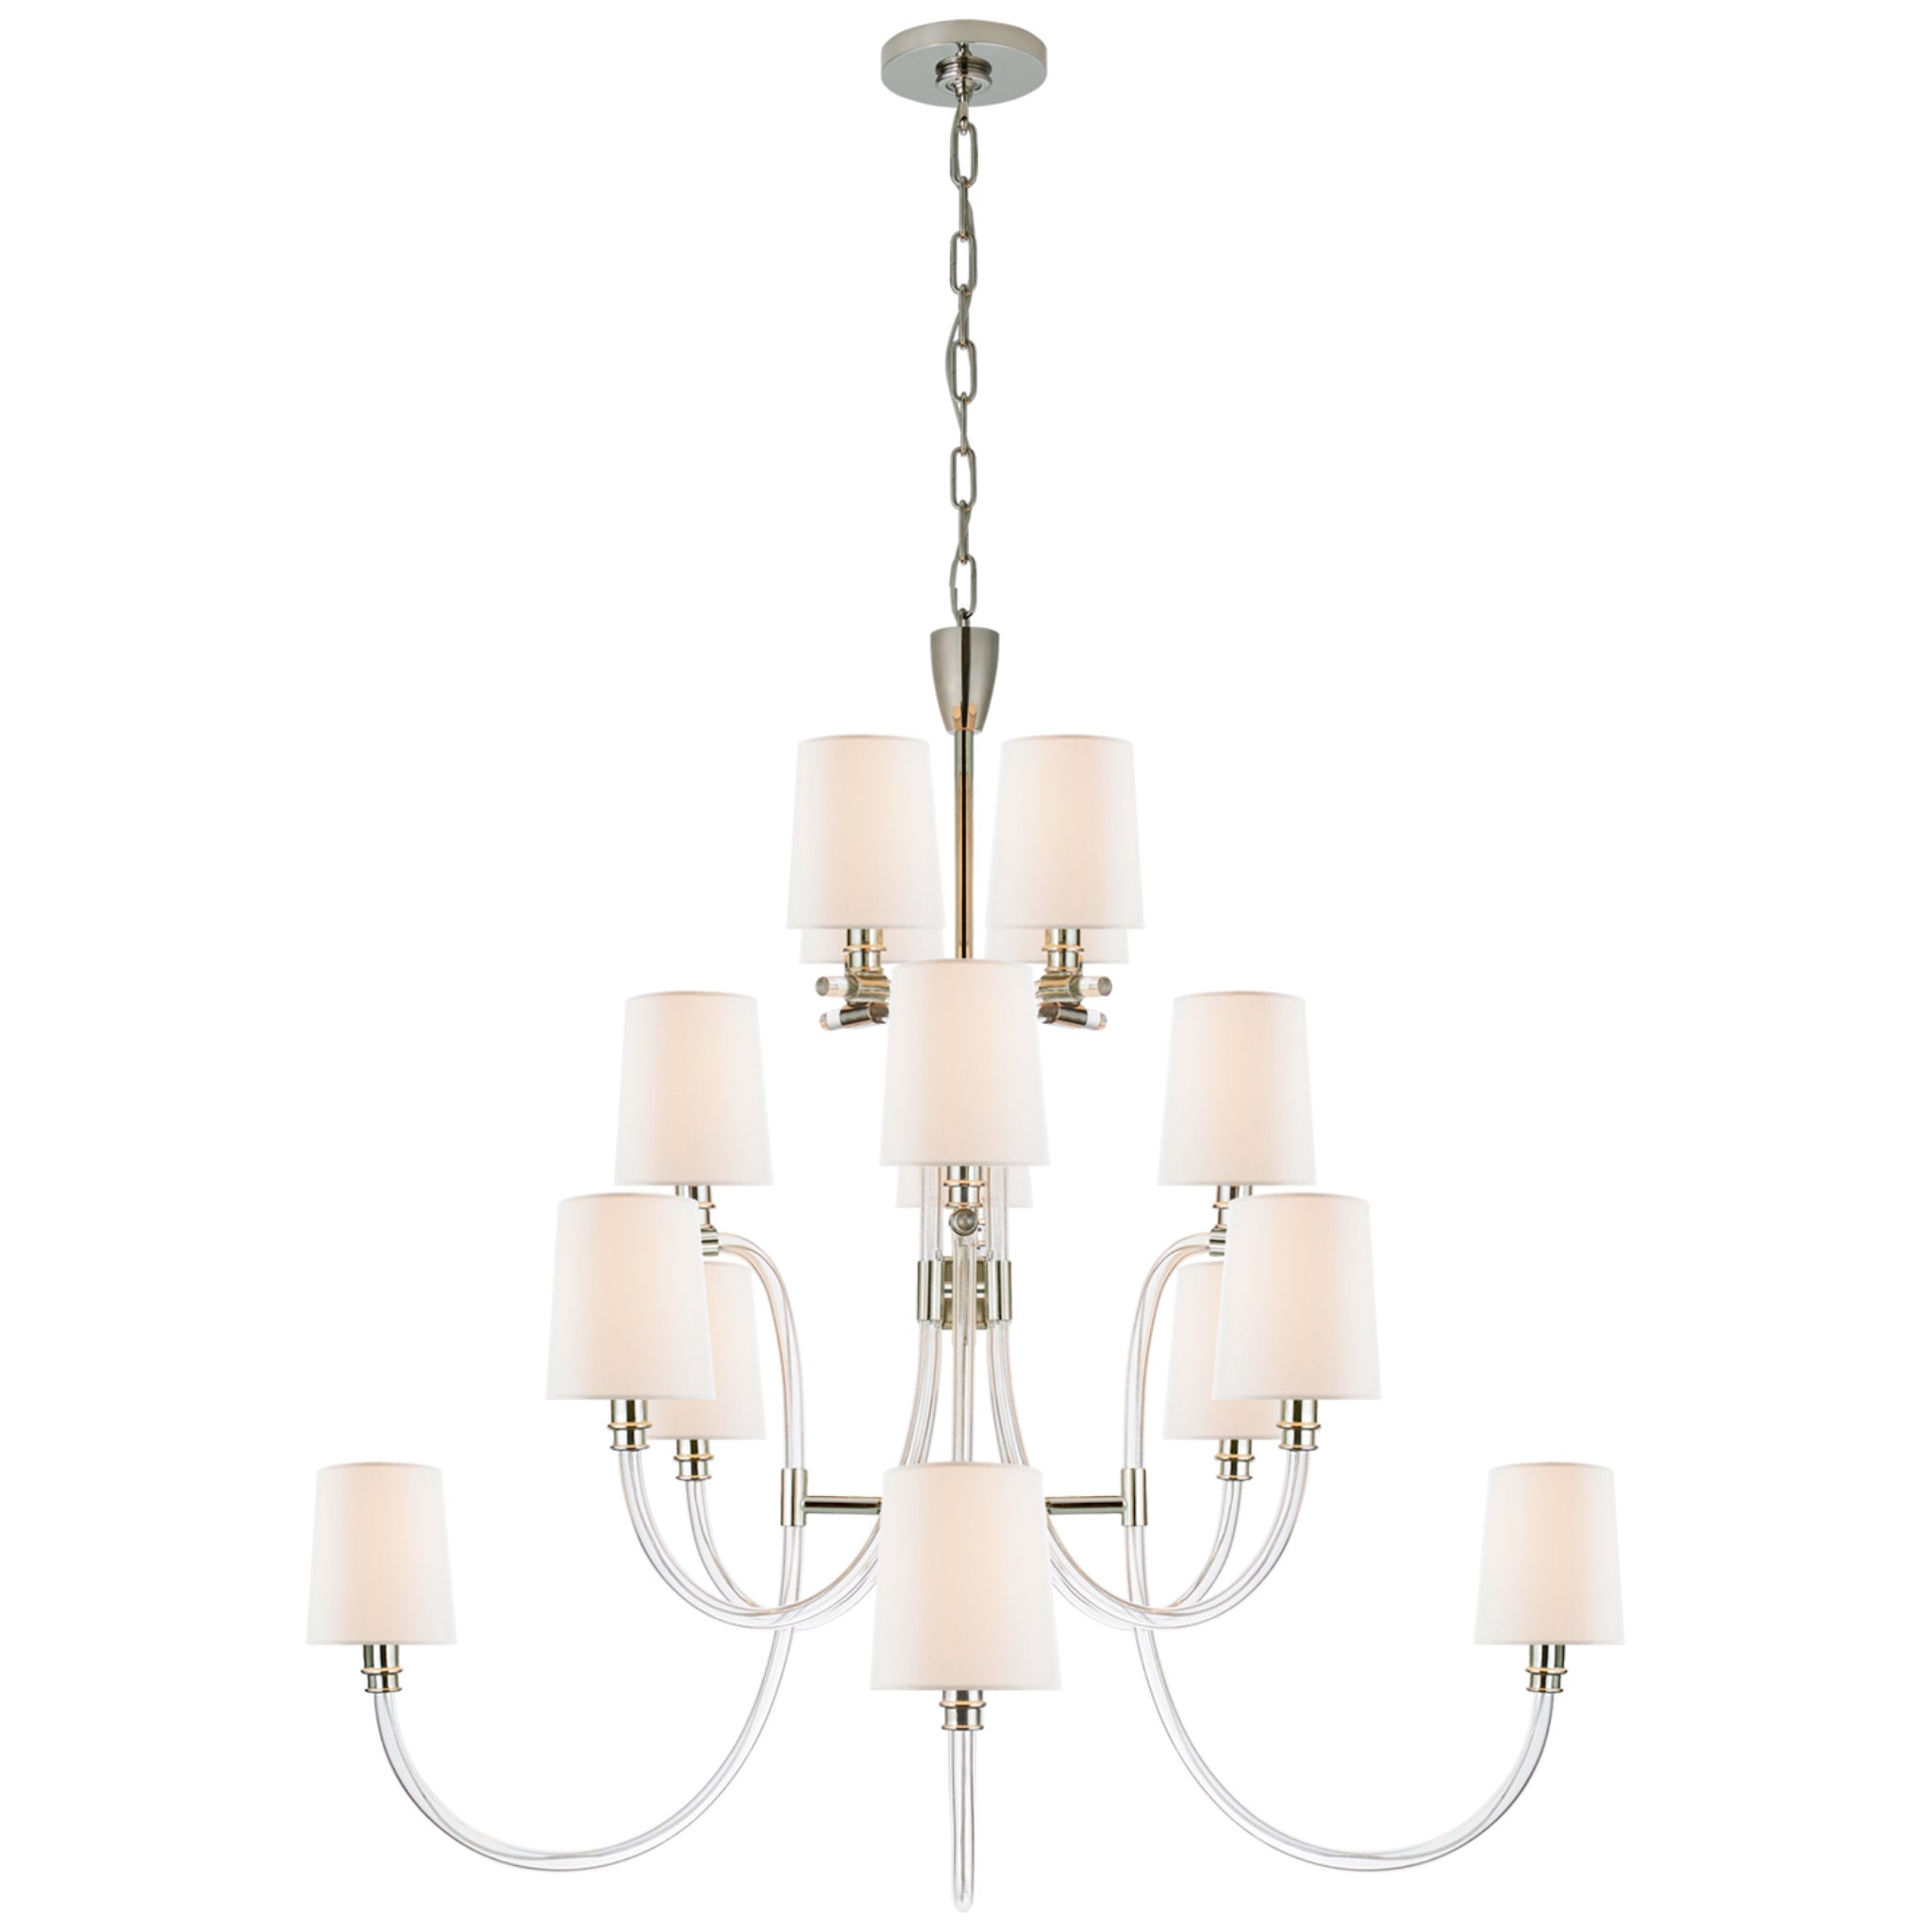 Julie Neill Clarice Large Chandelier in Clear Acrylic and Polished Nickel with Linen Shades